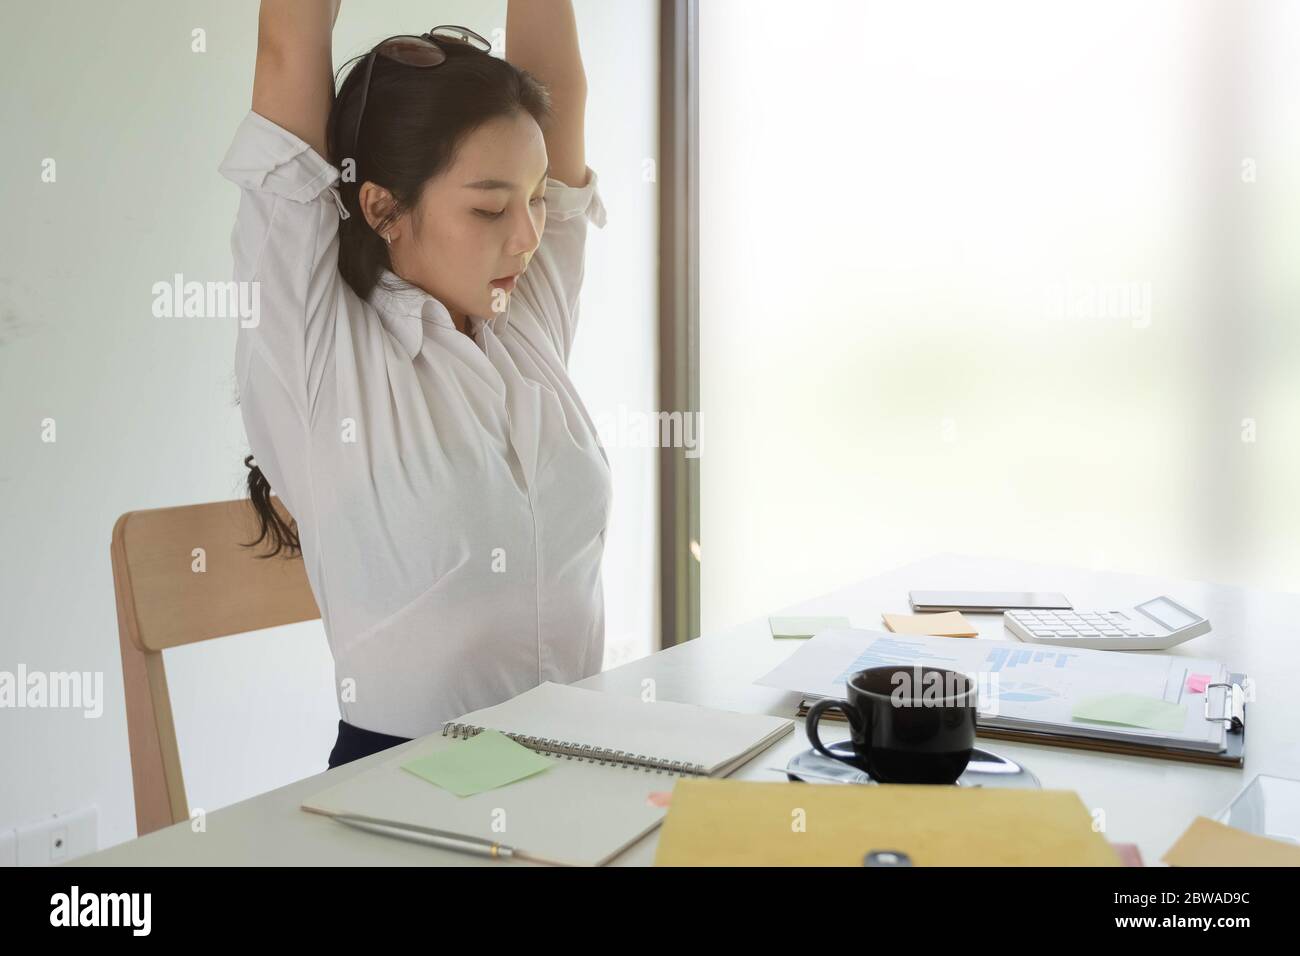 Businesswoman relaxing at comfortable in office hands behind head, happy woman resting in office satisfied after work Stock Photo